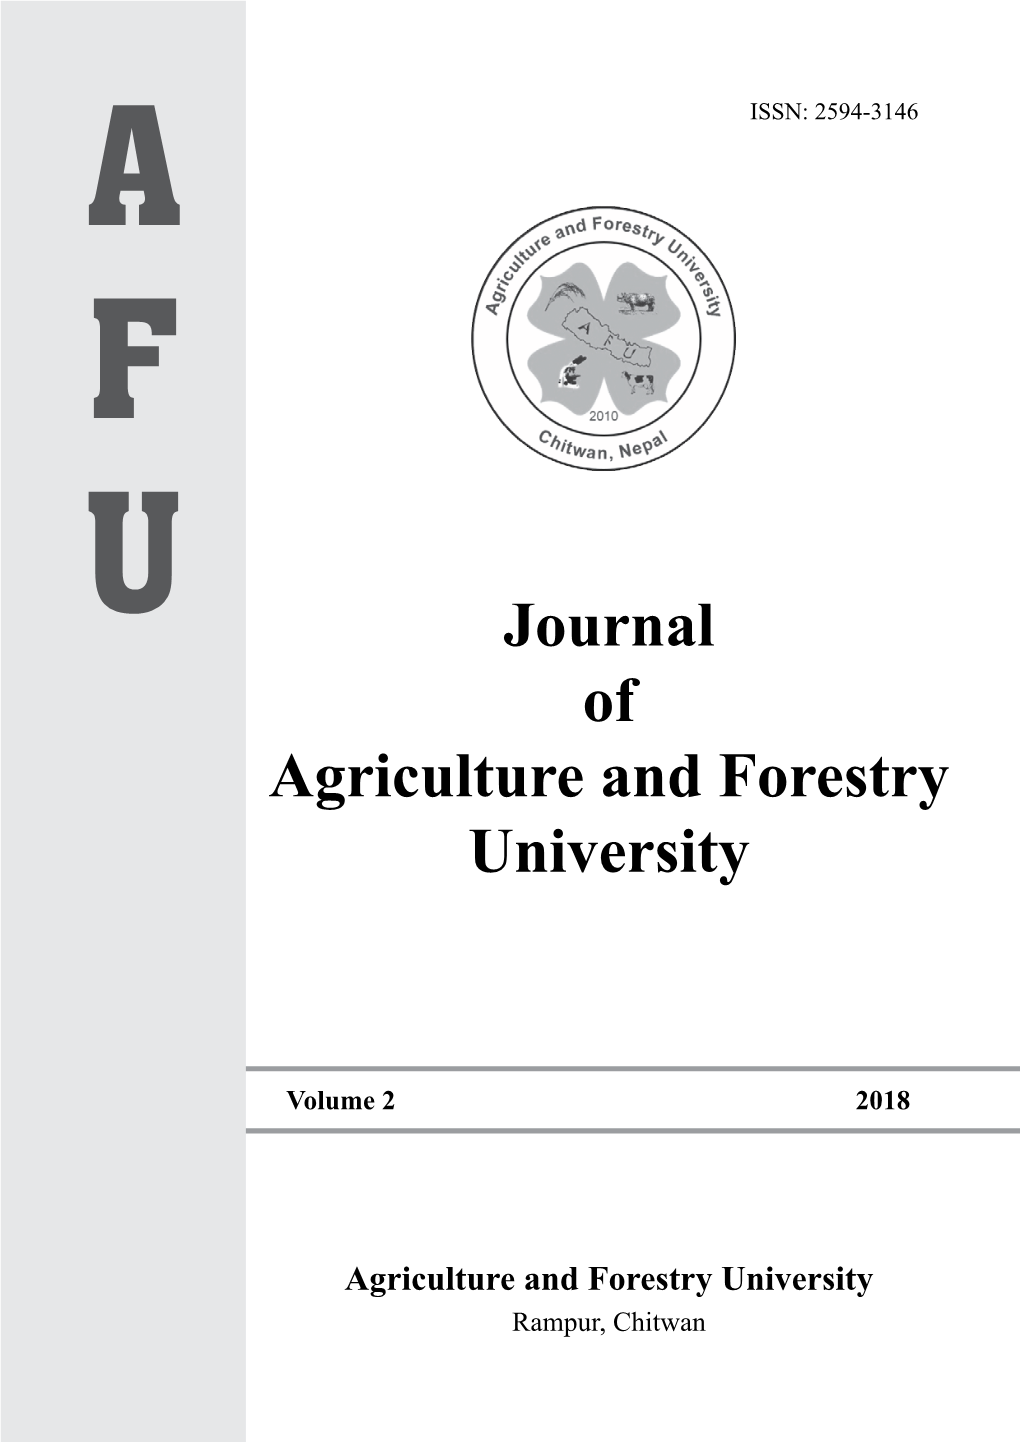 Journal of Agriculture and Forestry University